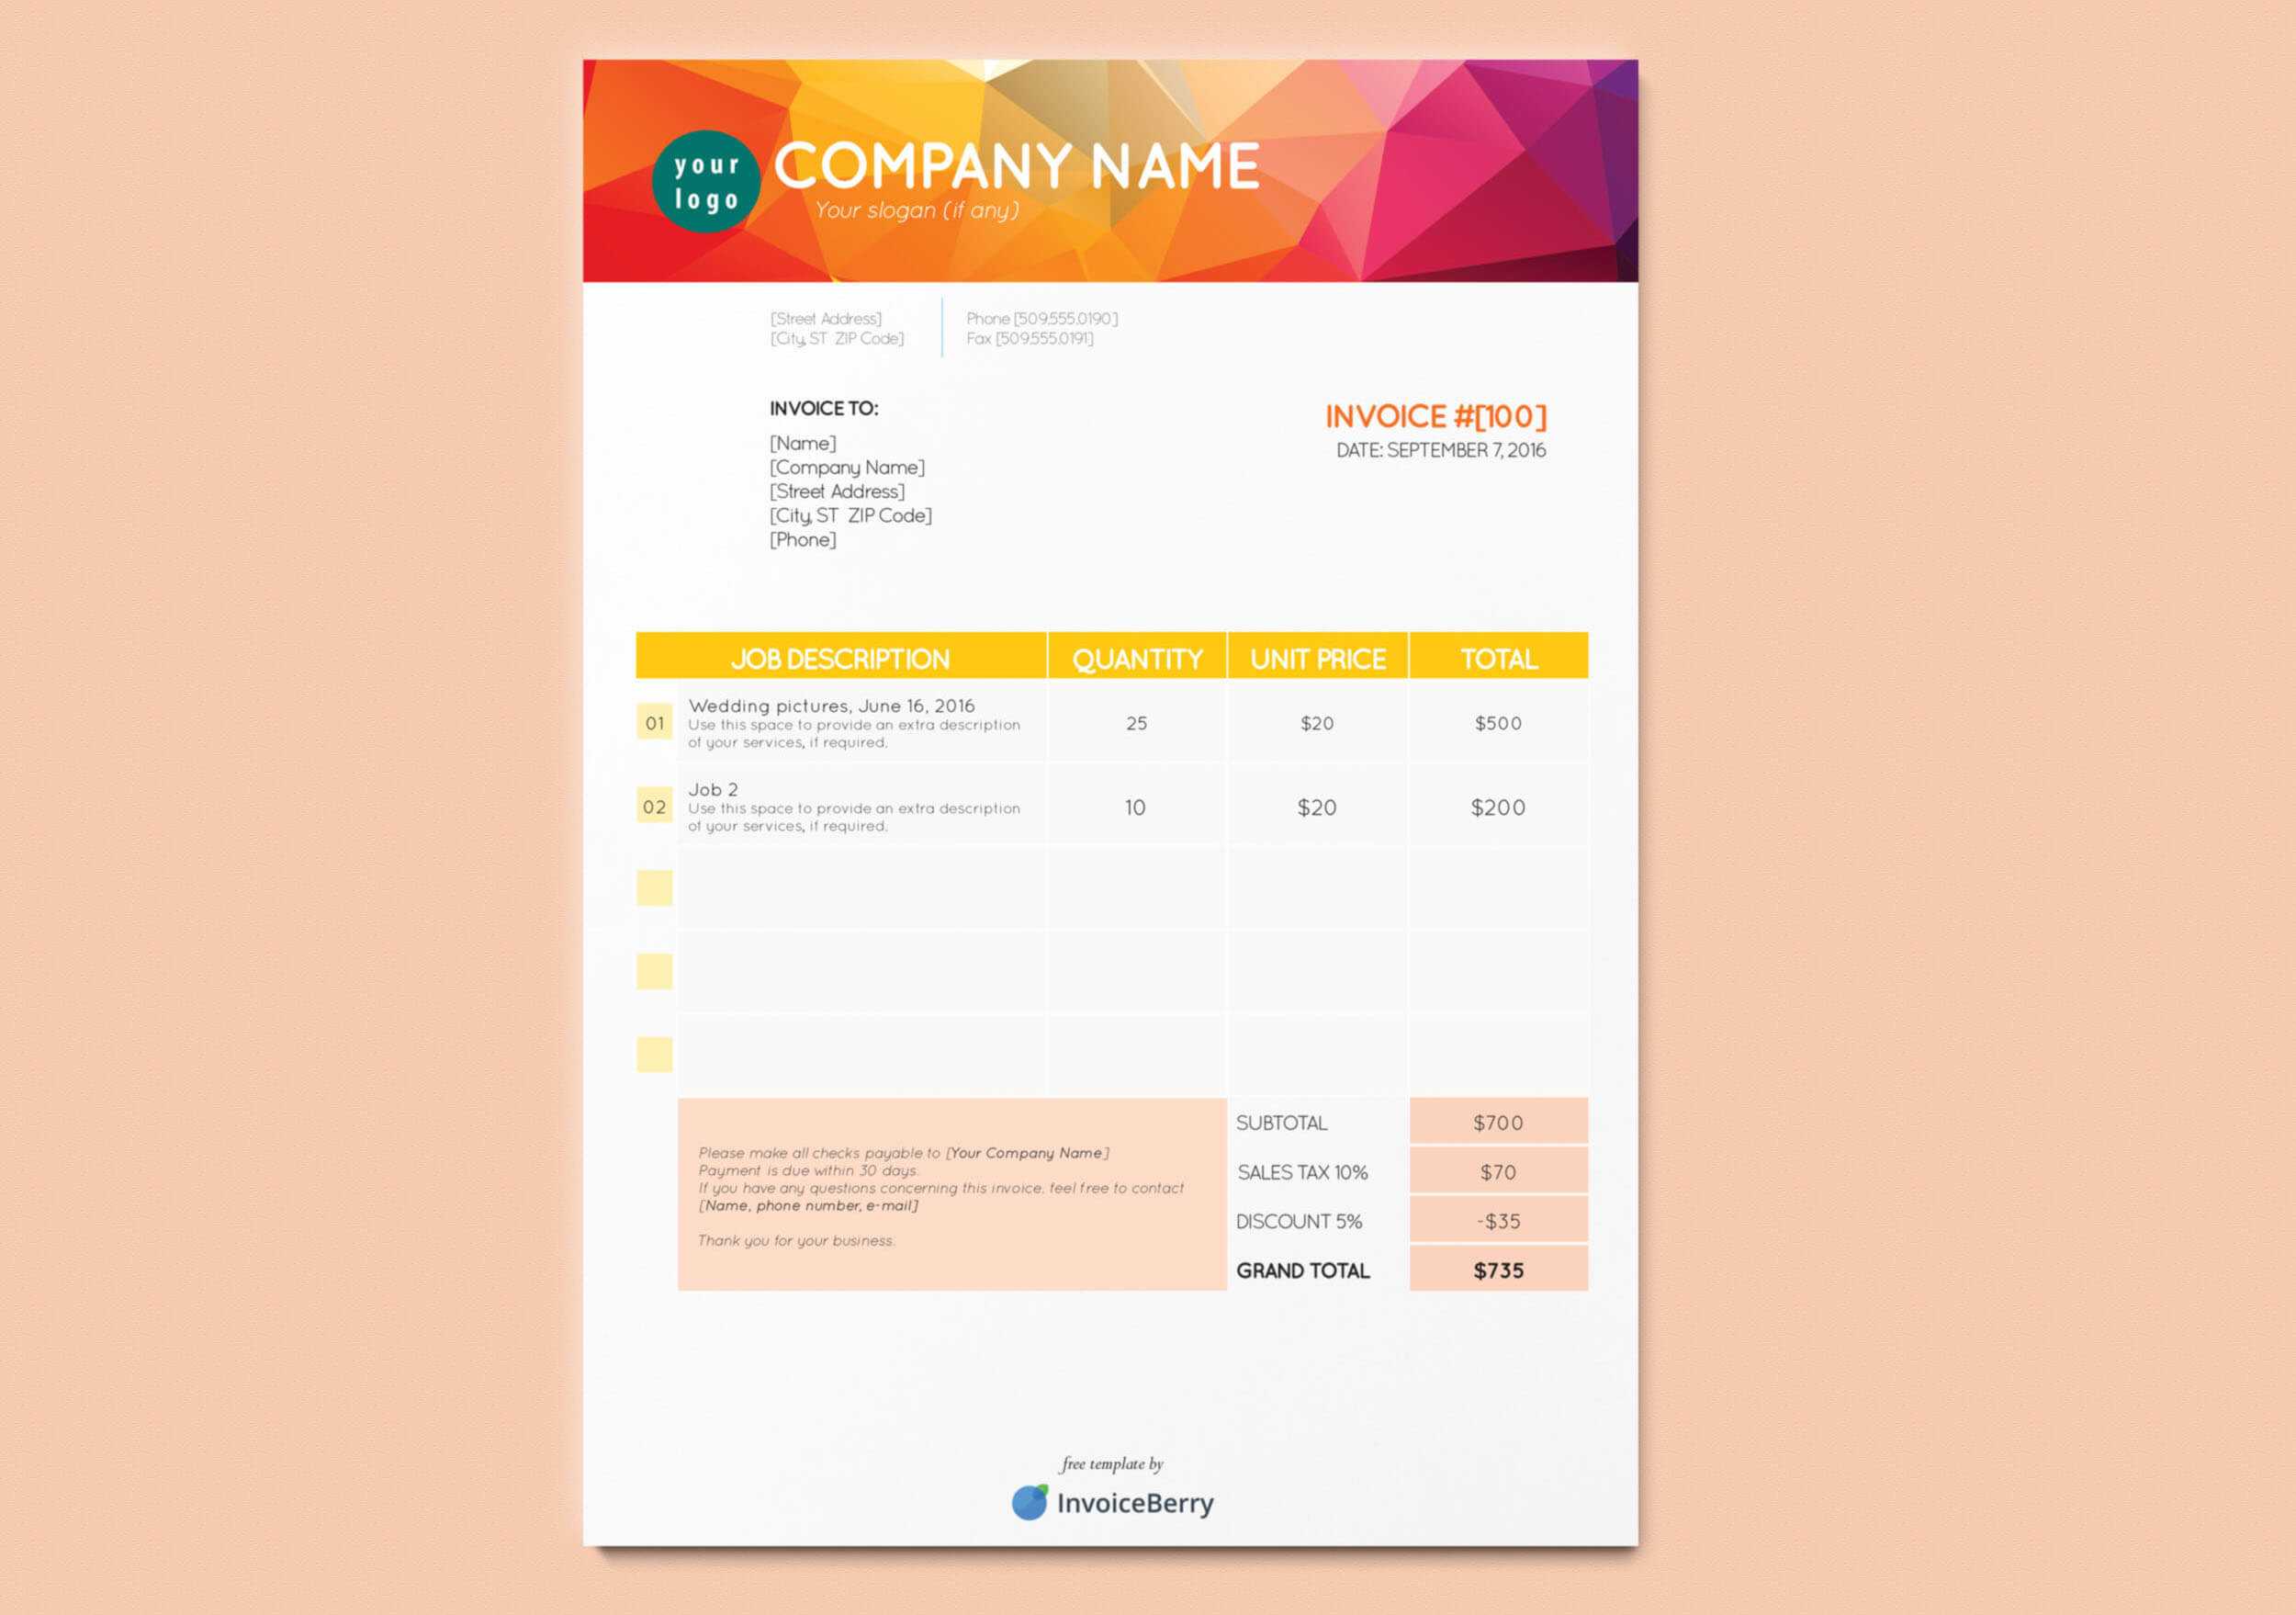 Free New Indesign Invoice Templates | Invoiceberry Blog In Cool Invoice Template Free